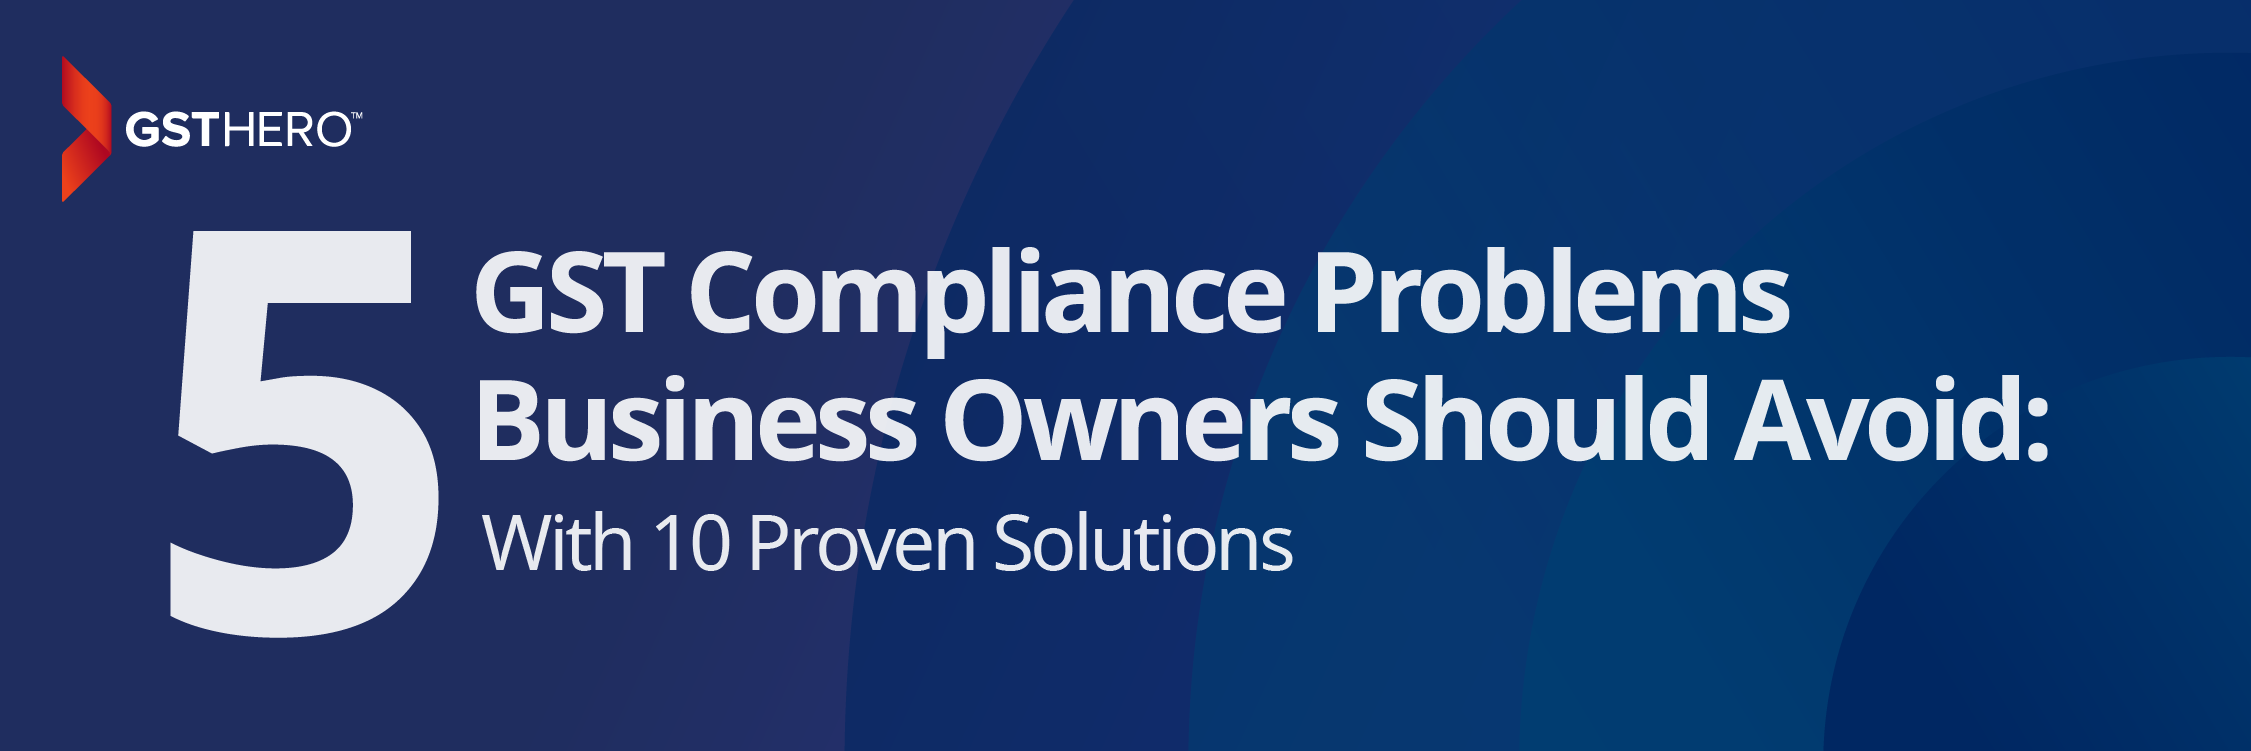 GST Compliance for business owners